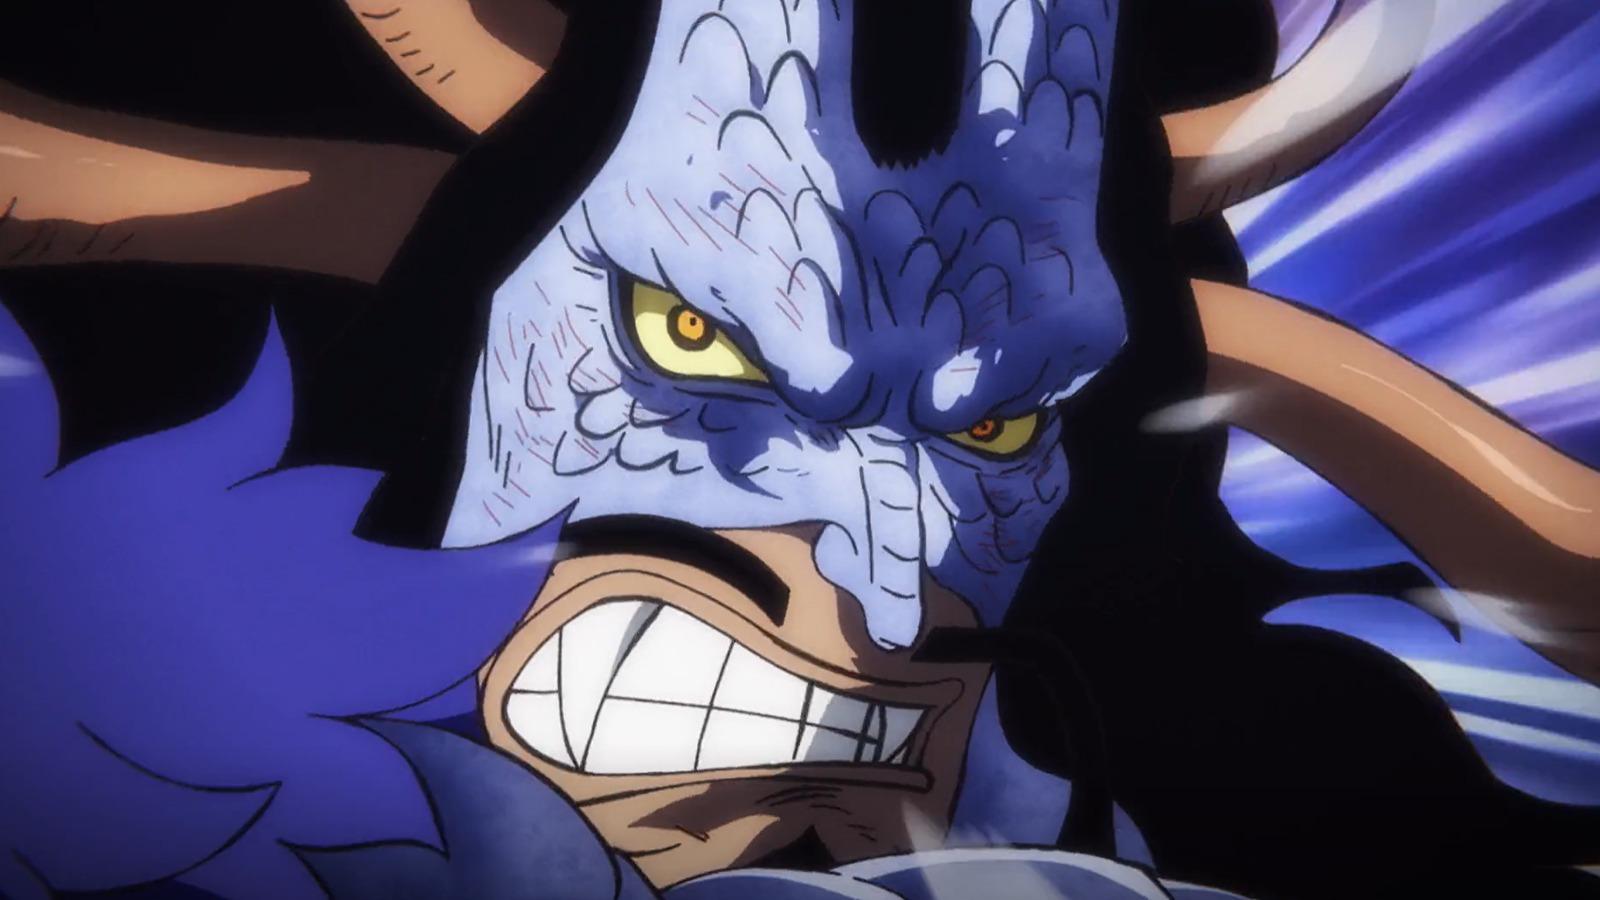 An image of Kaido from One Piece